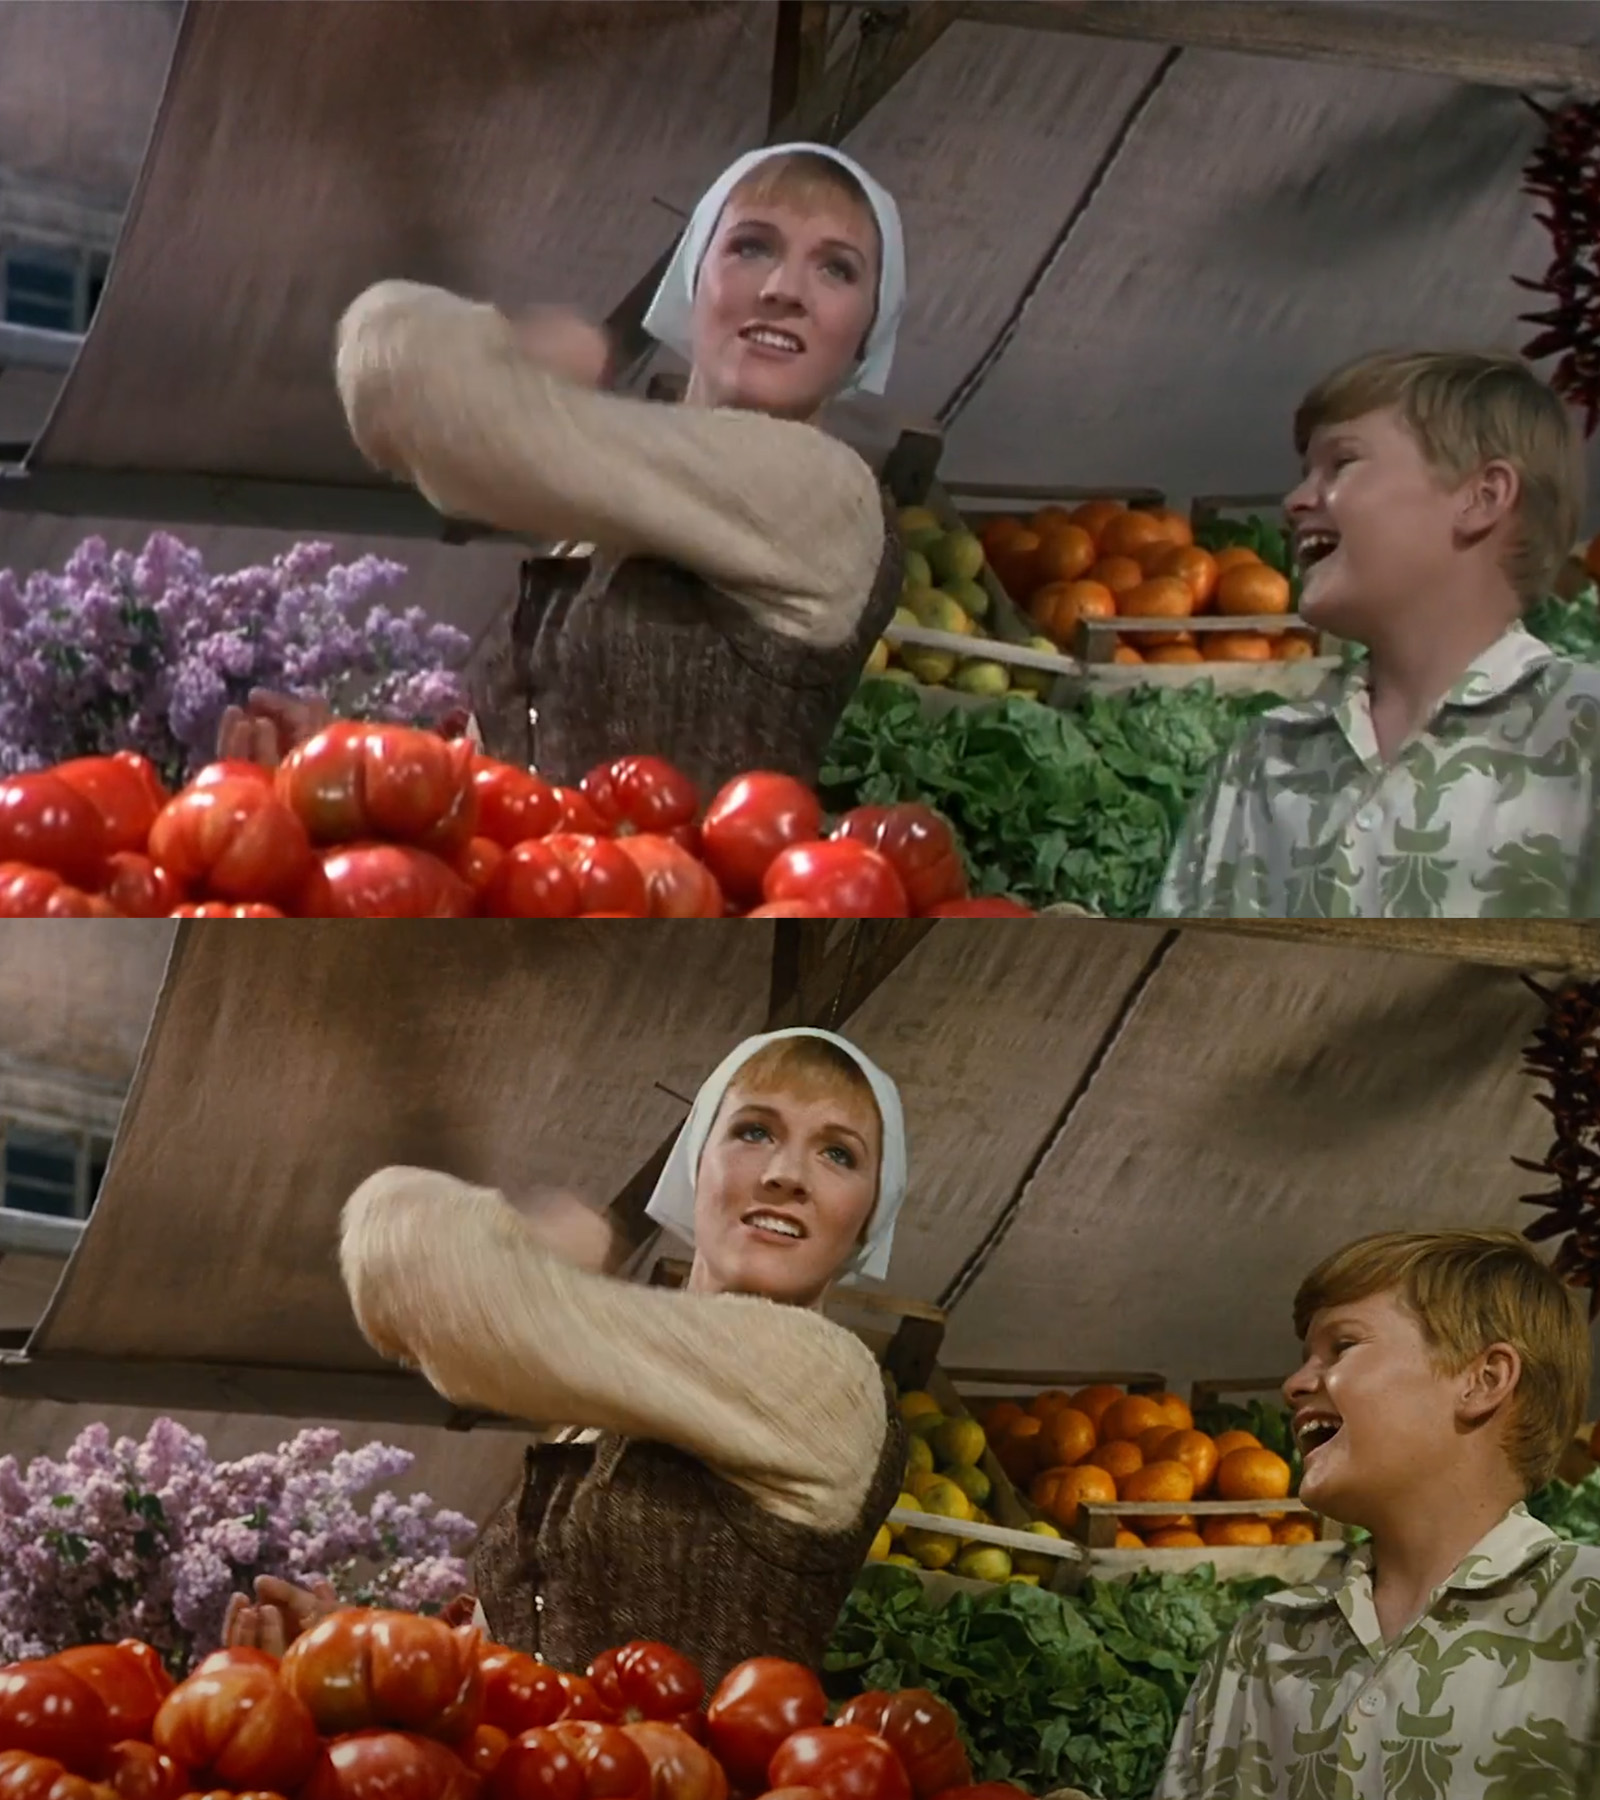 A frame from The Sound of Music on DVD vs the 2018 4K reprint.